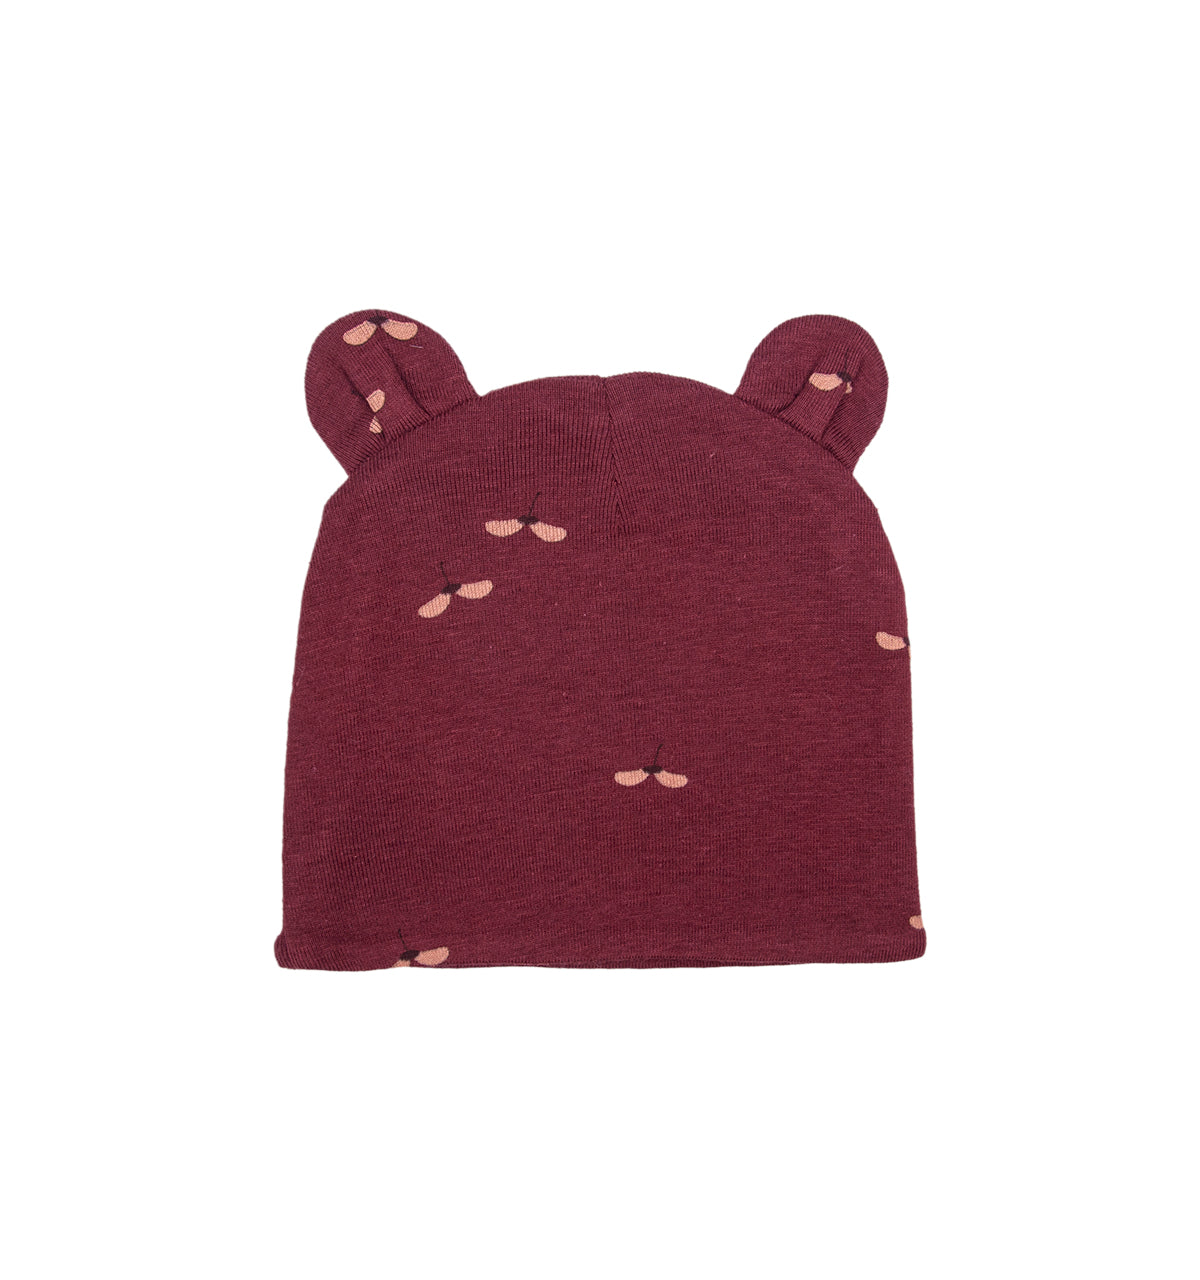 Baby Hat with Ears - Seedfly Brick